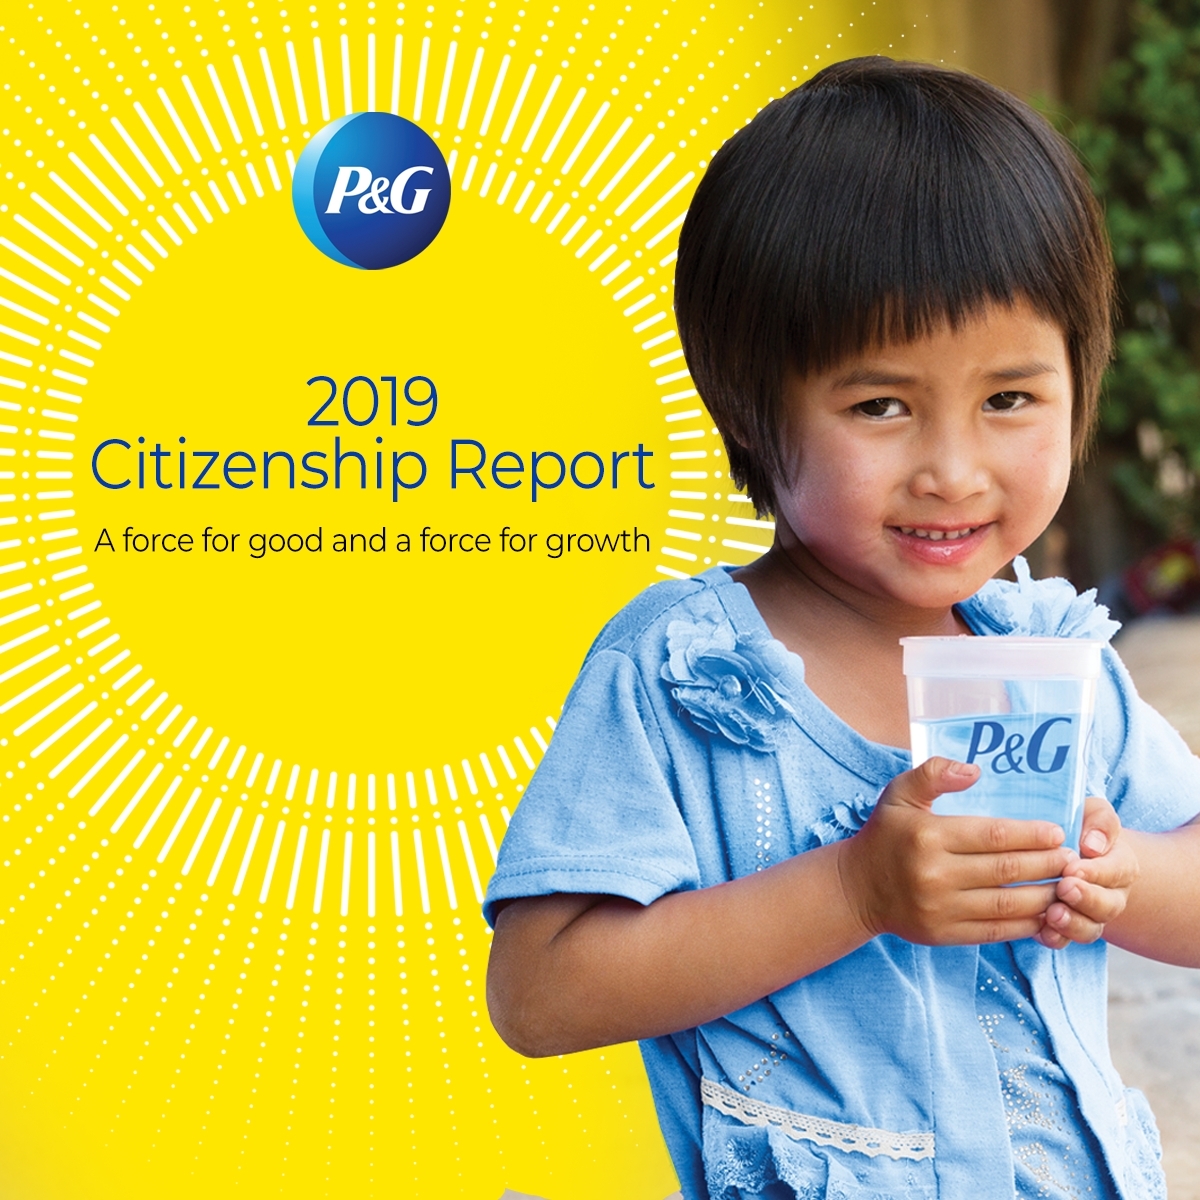 P G 19 Citizenship Report Highlights Commitment To Community Impact Gender Equality Diversity Inclusion And Sustainability Business Wire